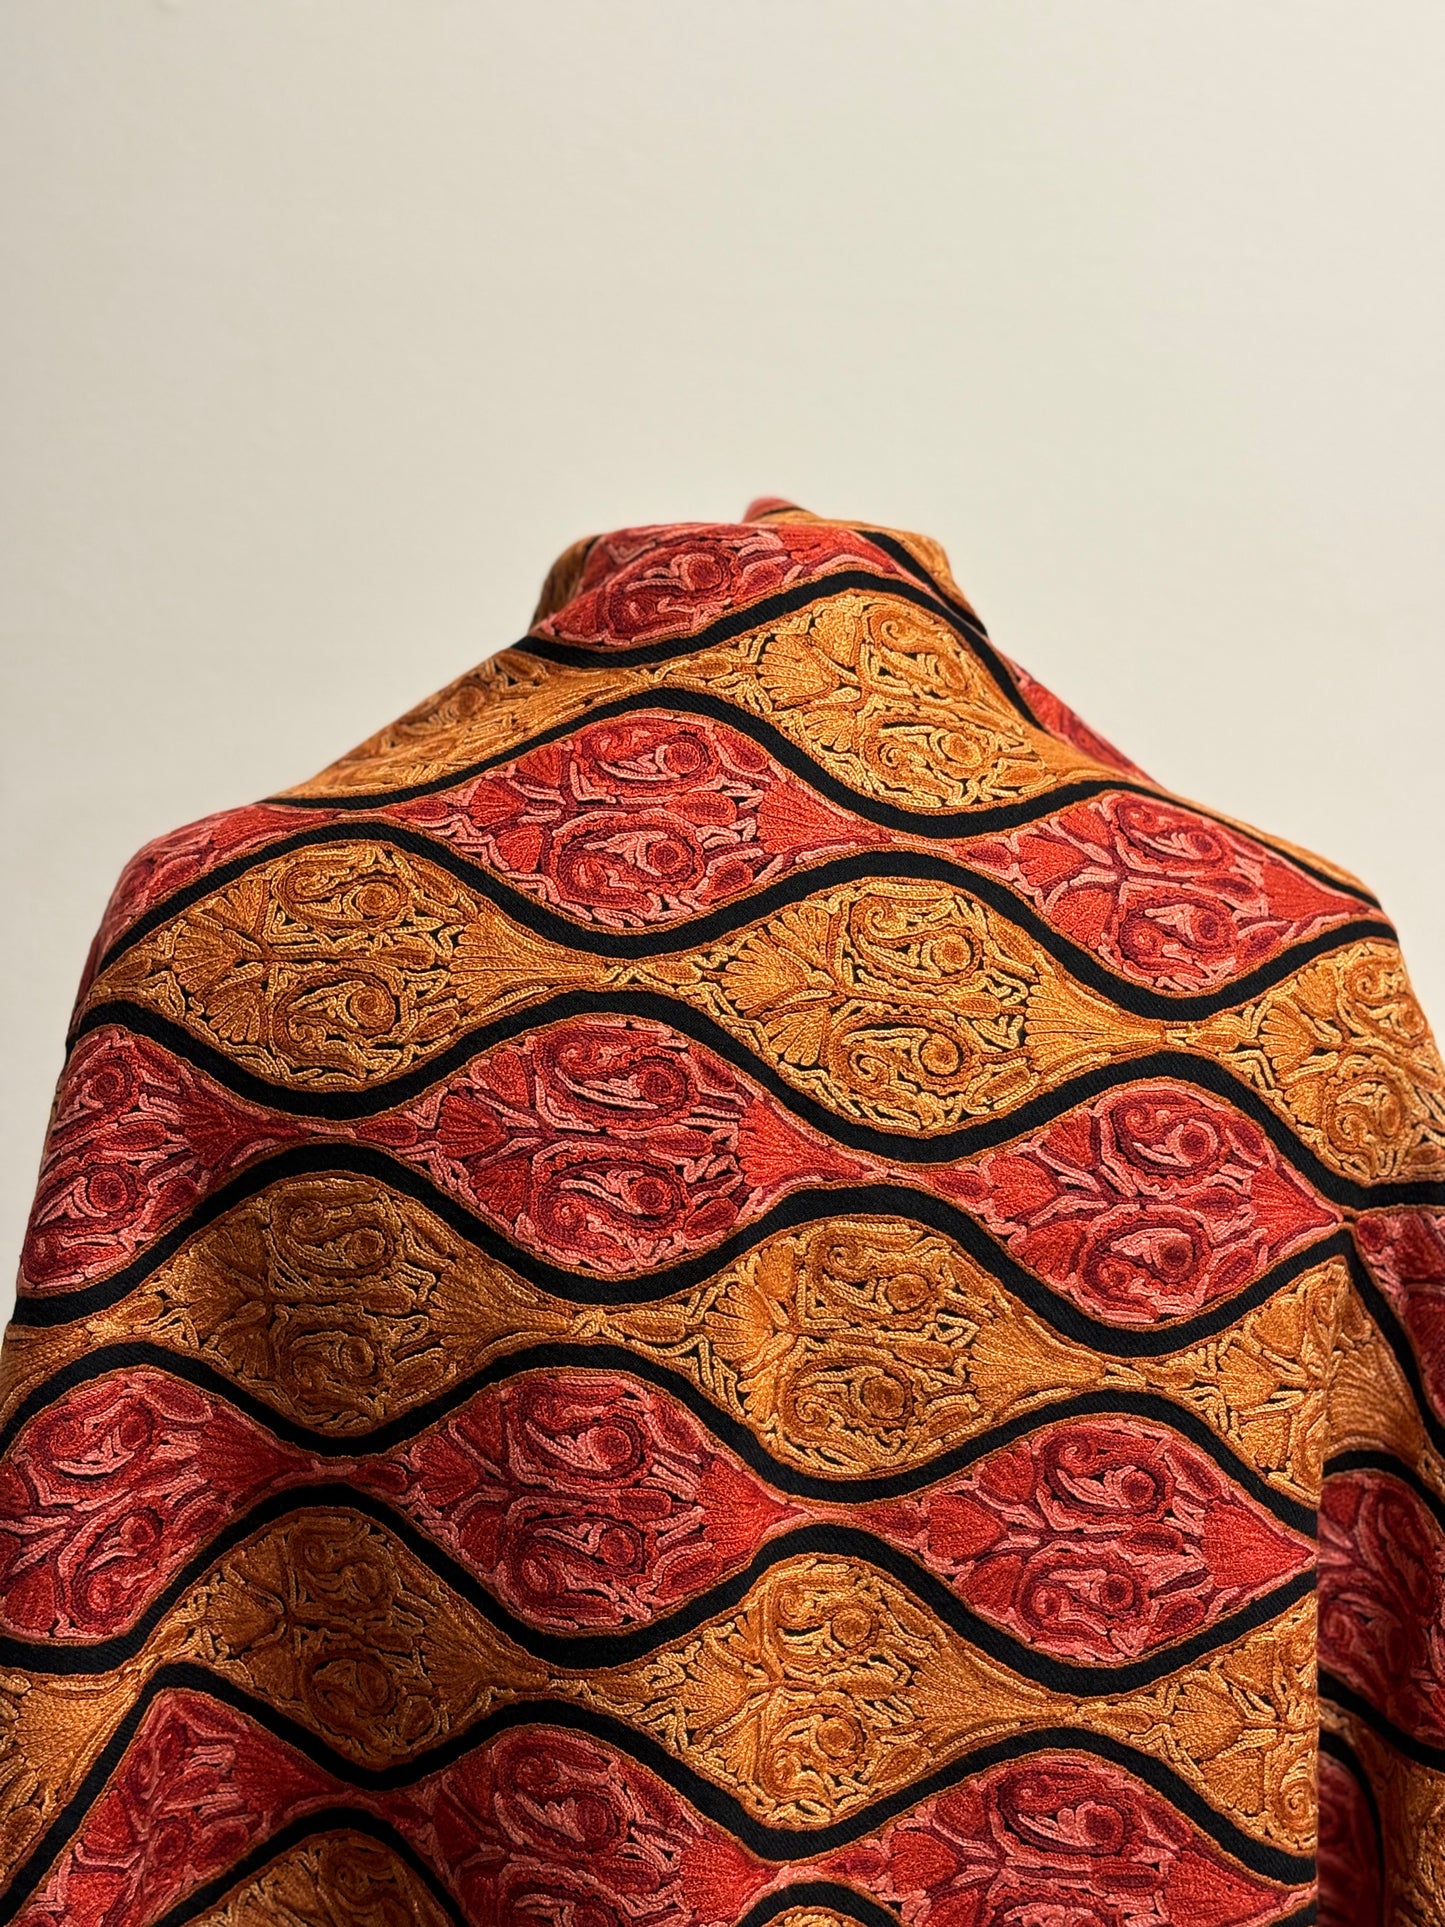 Shawl- Black color Woolen shawl with Red and Yellow Aari embroidery